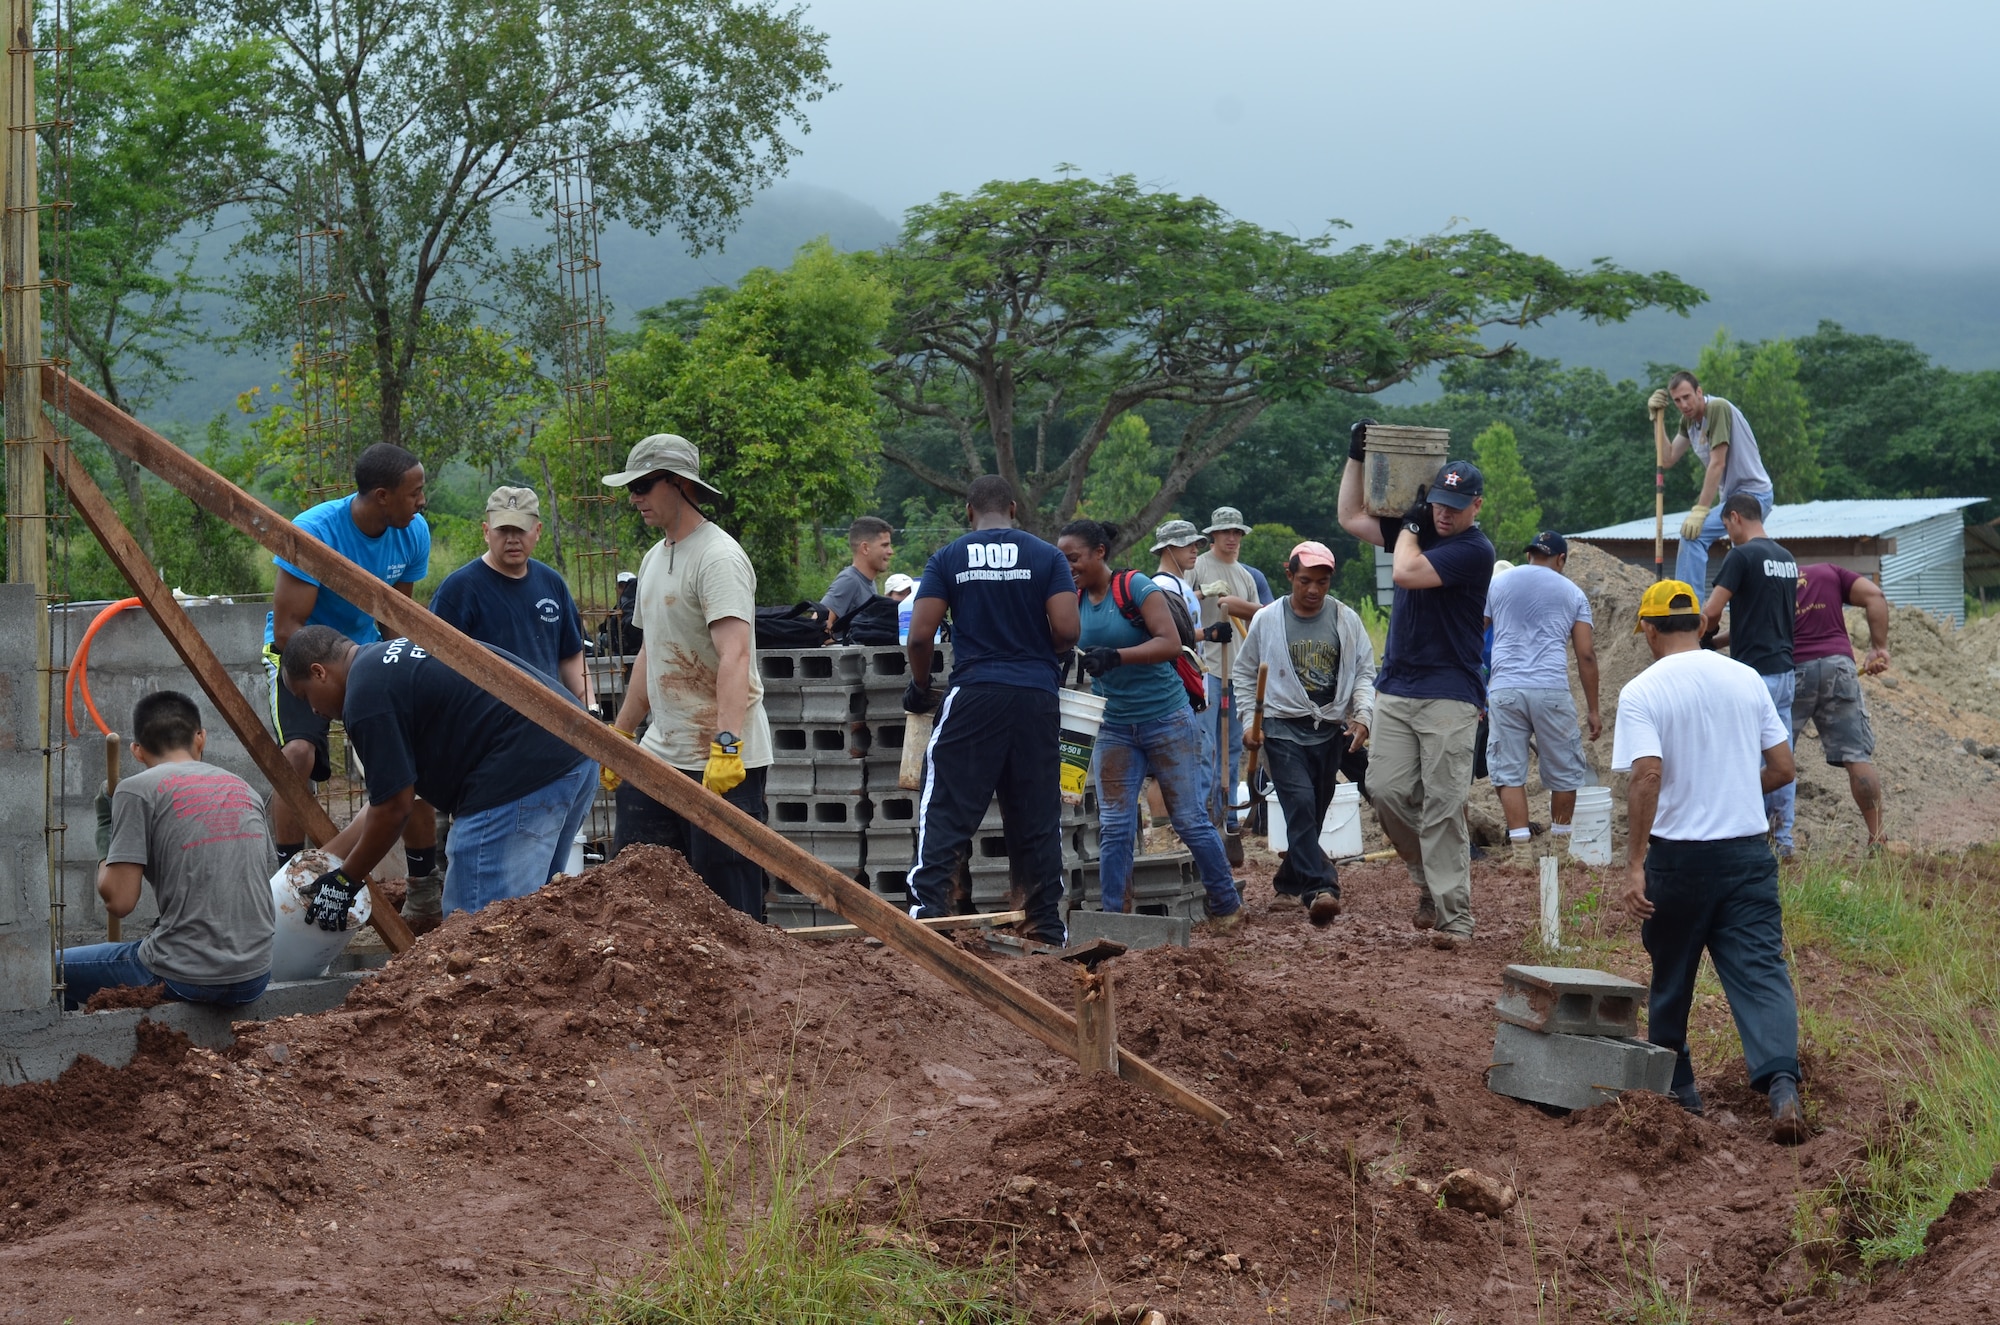 Twenty-seven volunteers from Joint Task Force- Bravo help carry cement blocks and shovel dirt for the foundation of 10 homes during a Habitat for Humanity build in La Paz, Honduras, Oct. 18, 2014.   The homes are the first of 20 homes that will eventually be built in the new La Paz site, and they are expected to be completed by Dec. 20, 2014.  Founded in 1976, Habitat for Humanity is a nonprofit, ecumenical Christian ministry dedicated to building and repairing homes with those in need.  Habitat for Humanity’s work began in Honduras in 1988 and over the years, reached more than 70 communities and served over 15,240 families. (U.S. Air Force Photo/Capt. Connie Dillon)